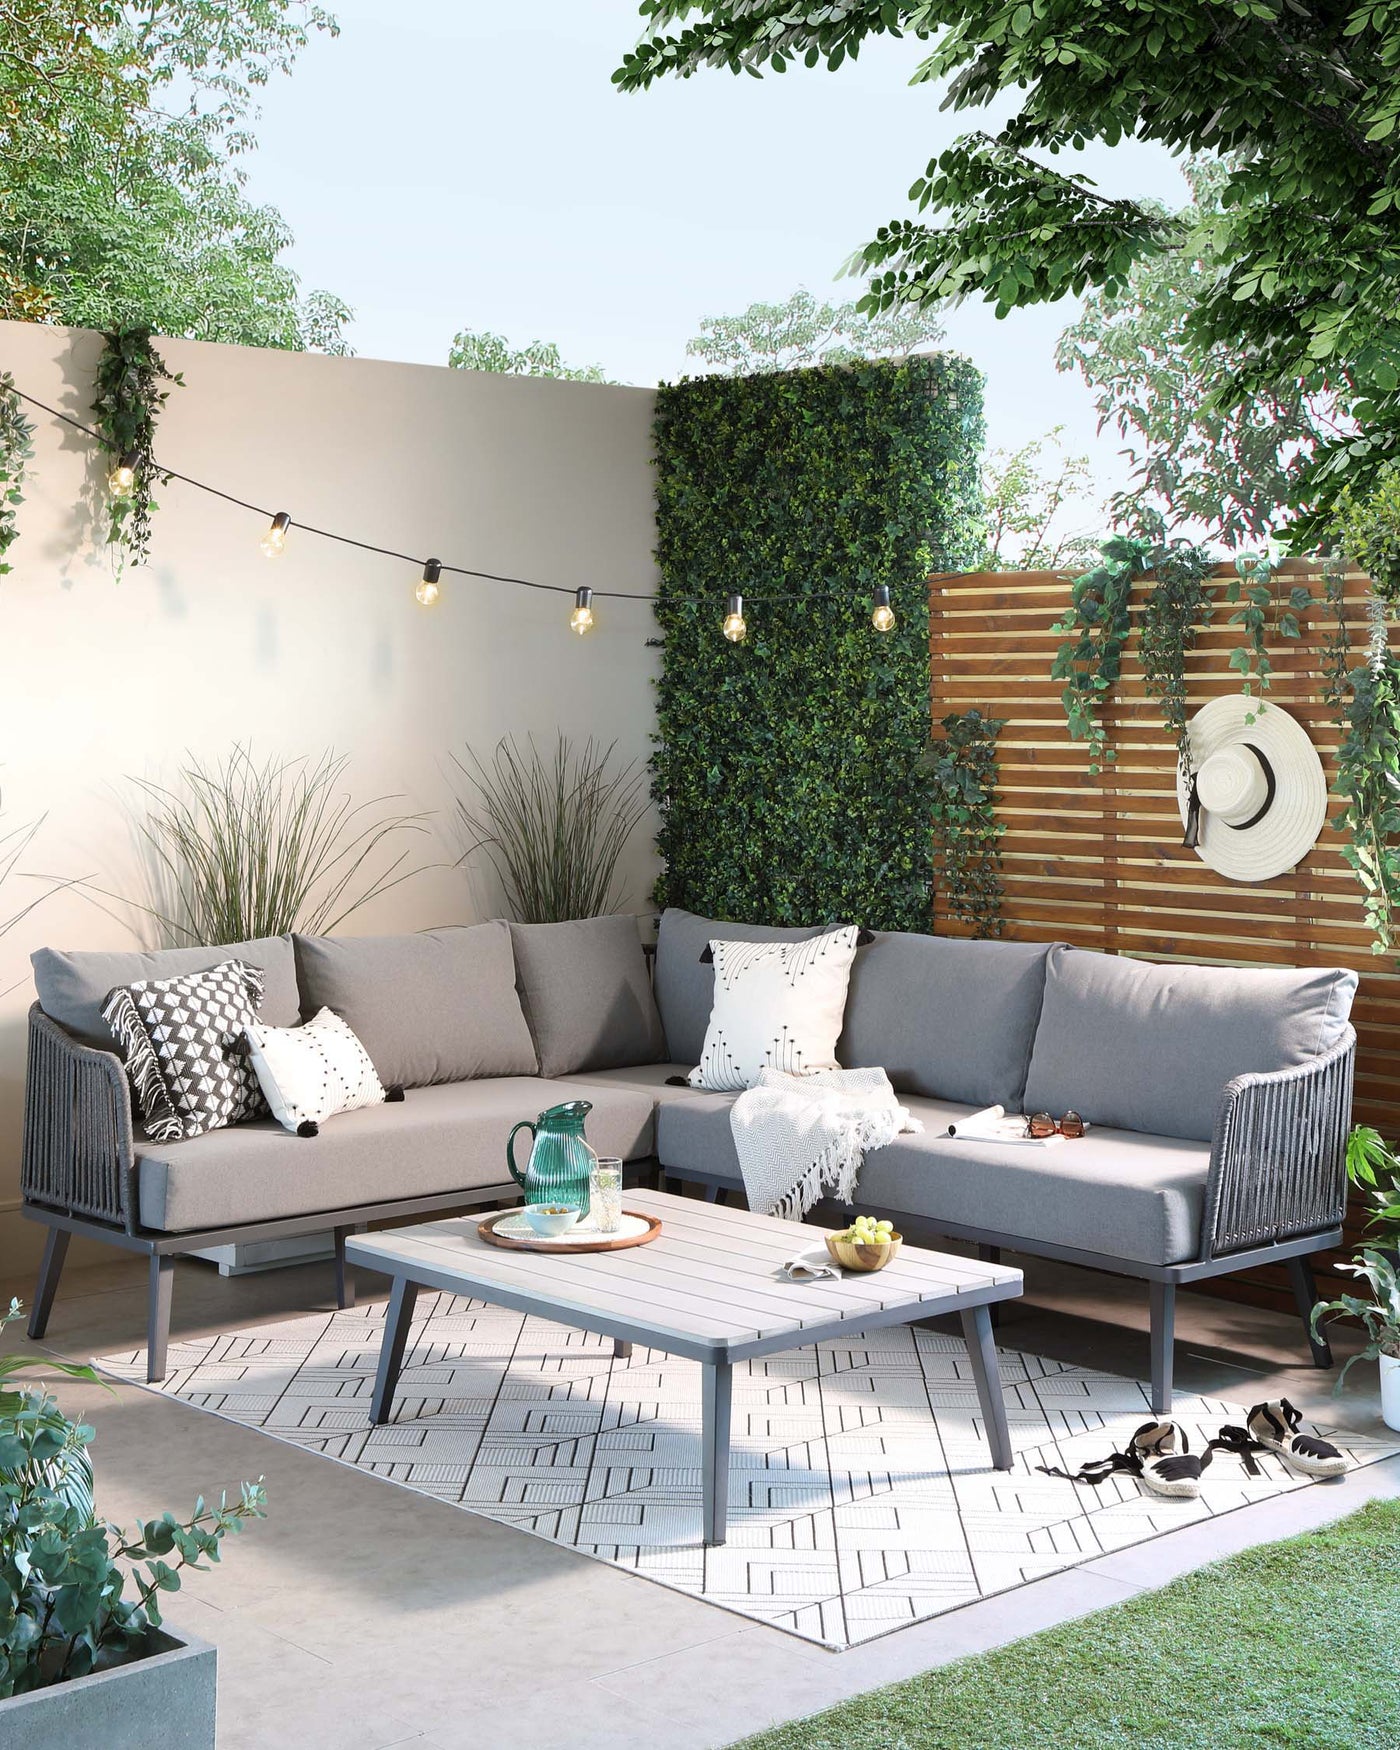 Modern outdoor furniture set featuring a sectional corner sofa with a sleek grey metal frame and plush light grey cushions, complemented by patterned throw pillows. A coordinating metal coffee table with a slatted top design sits at the centre. The set is arranged on a patterned outdoor rug, creating a cosy patio arrangement.